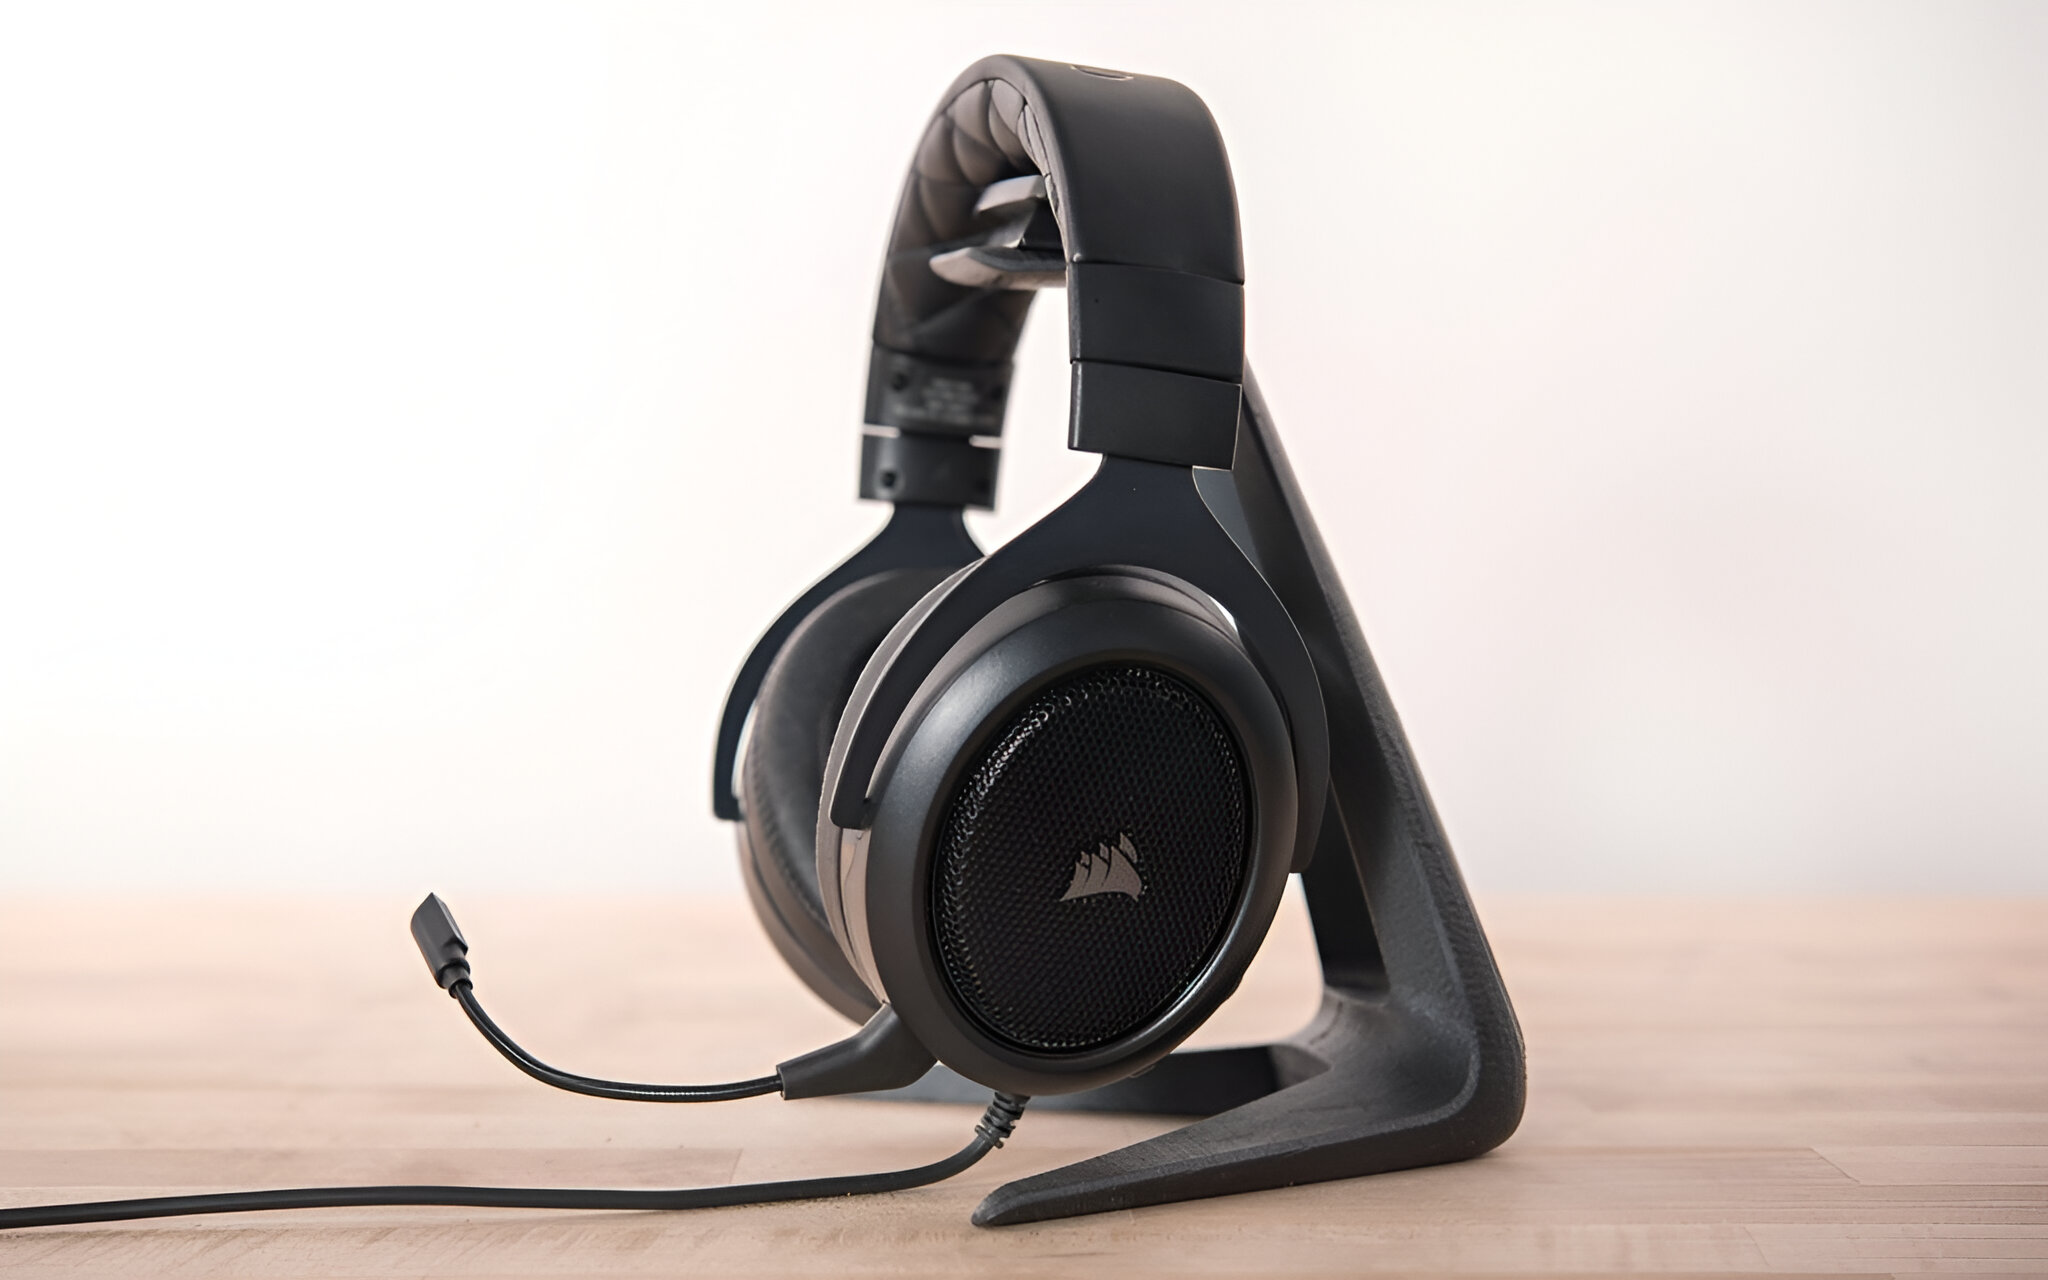 HS50 Gaming Headset: People Can Hear What I Play